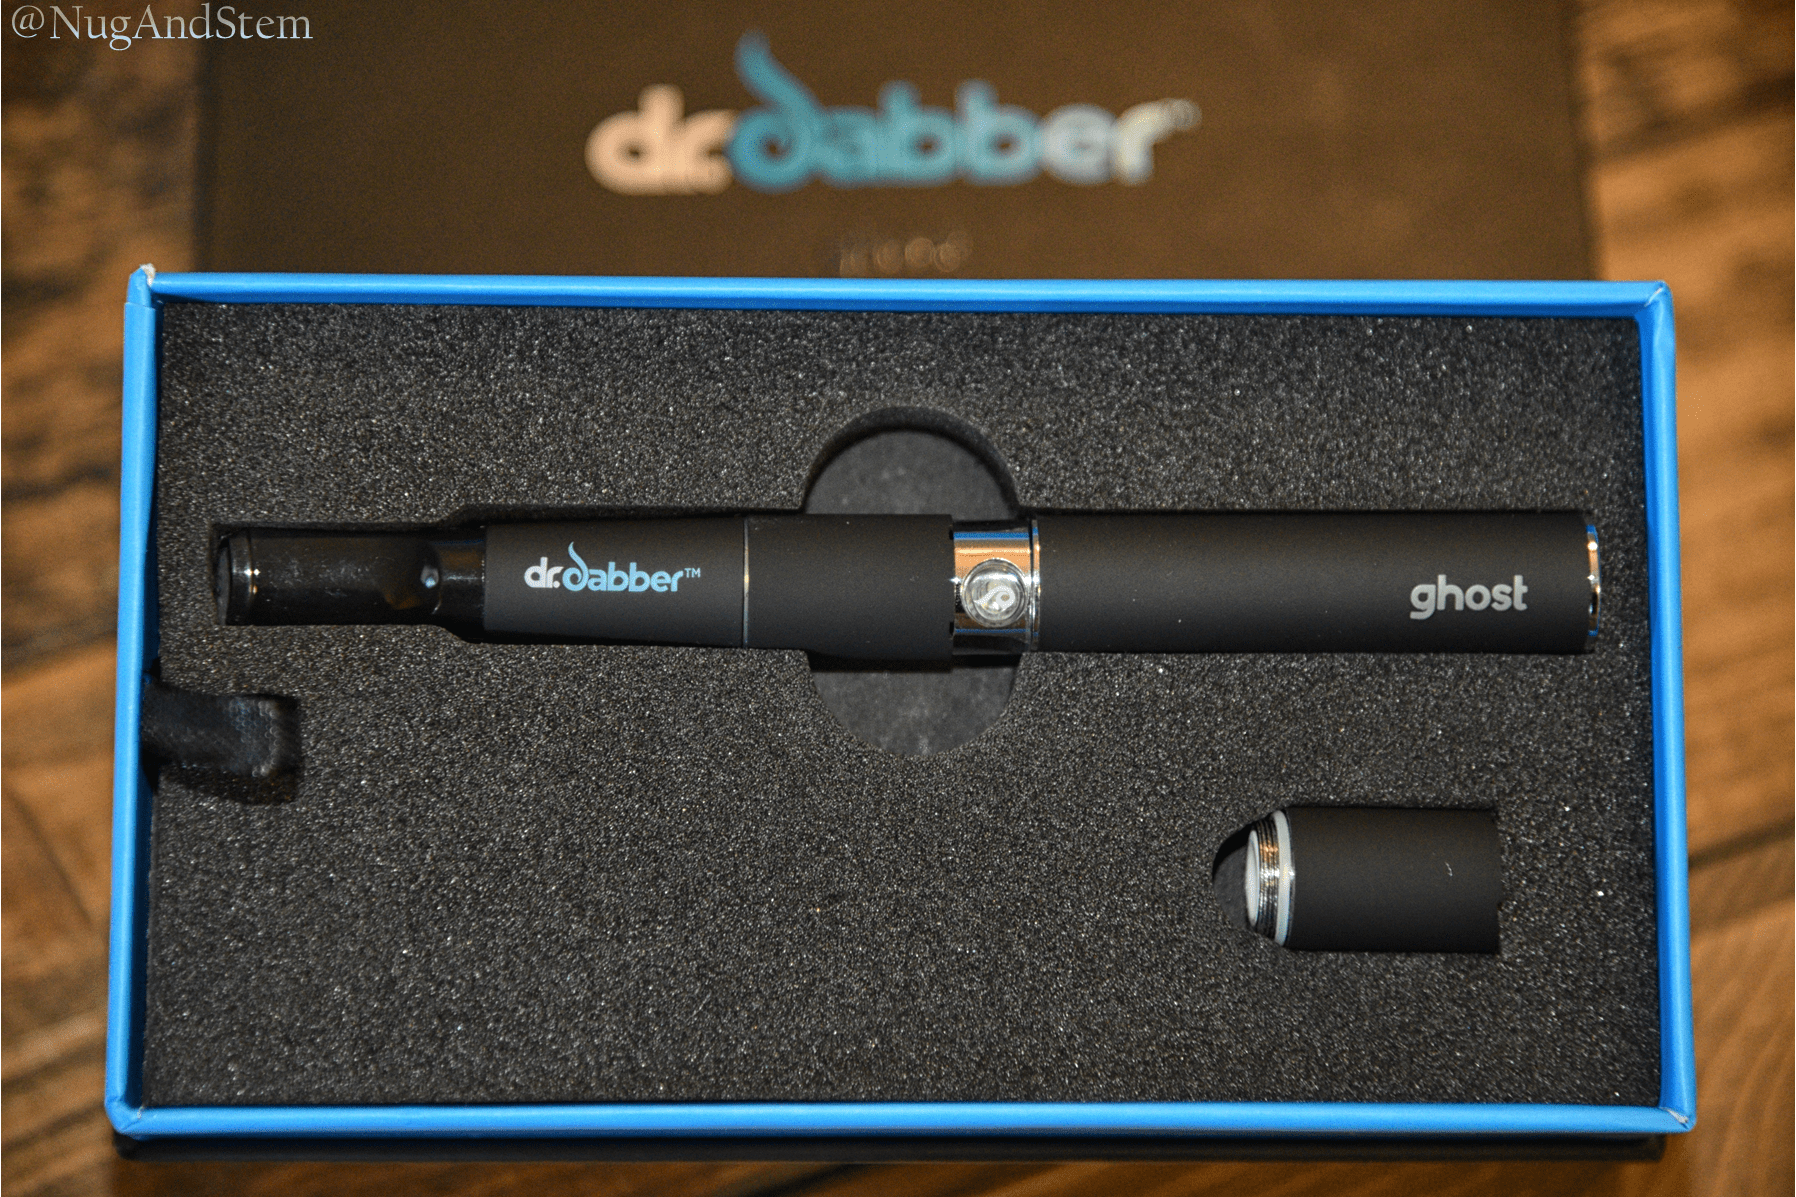 Dr. Dabber Light & Ghost Save On Cannabis Product Packaging